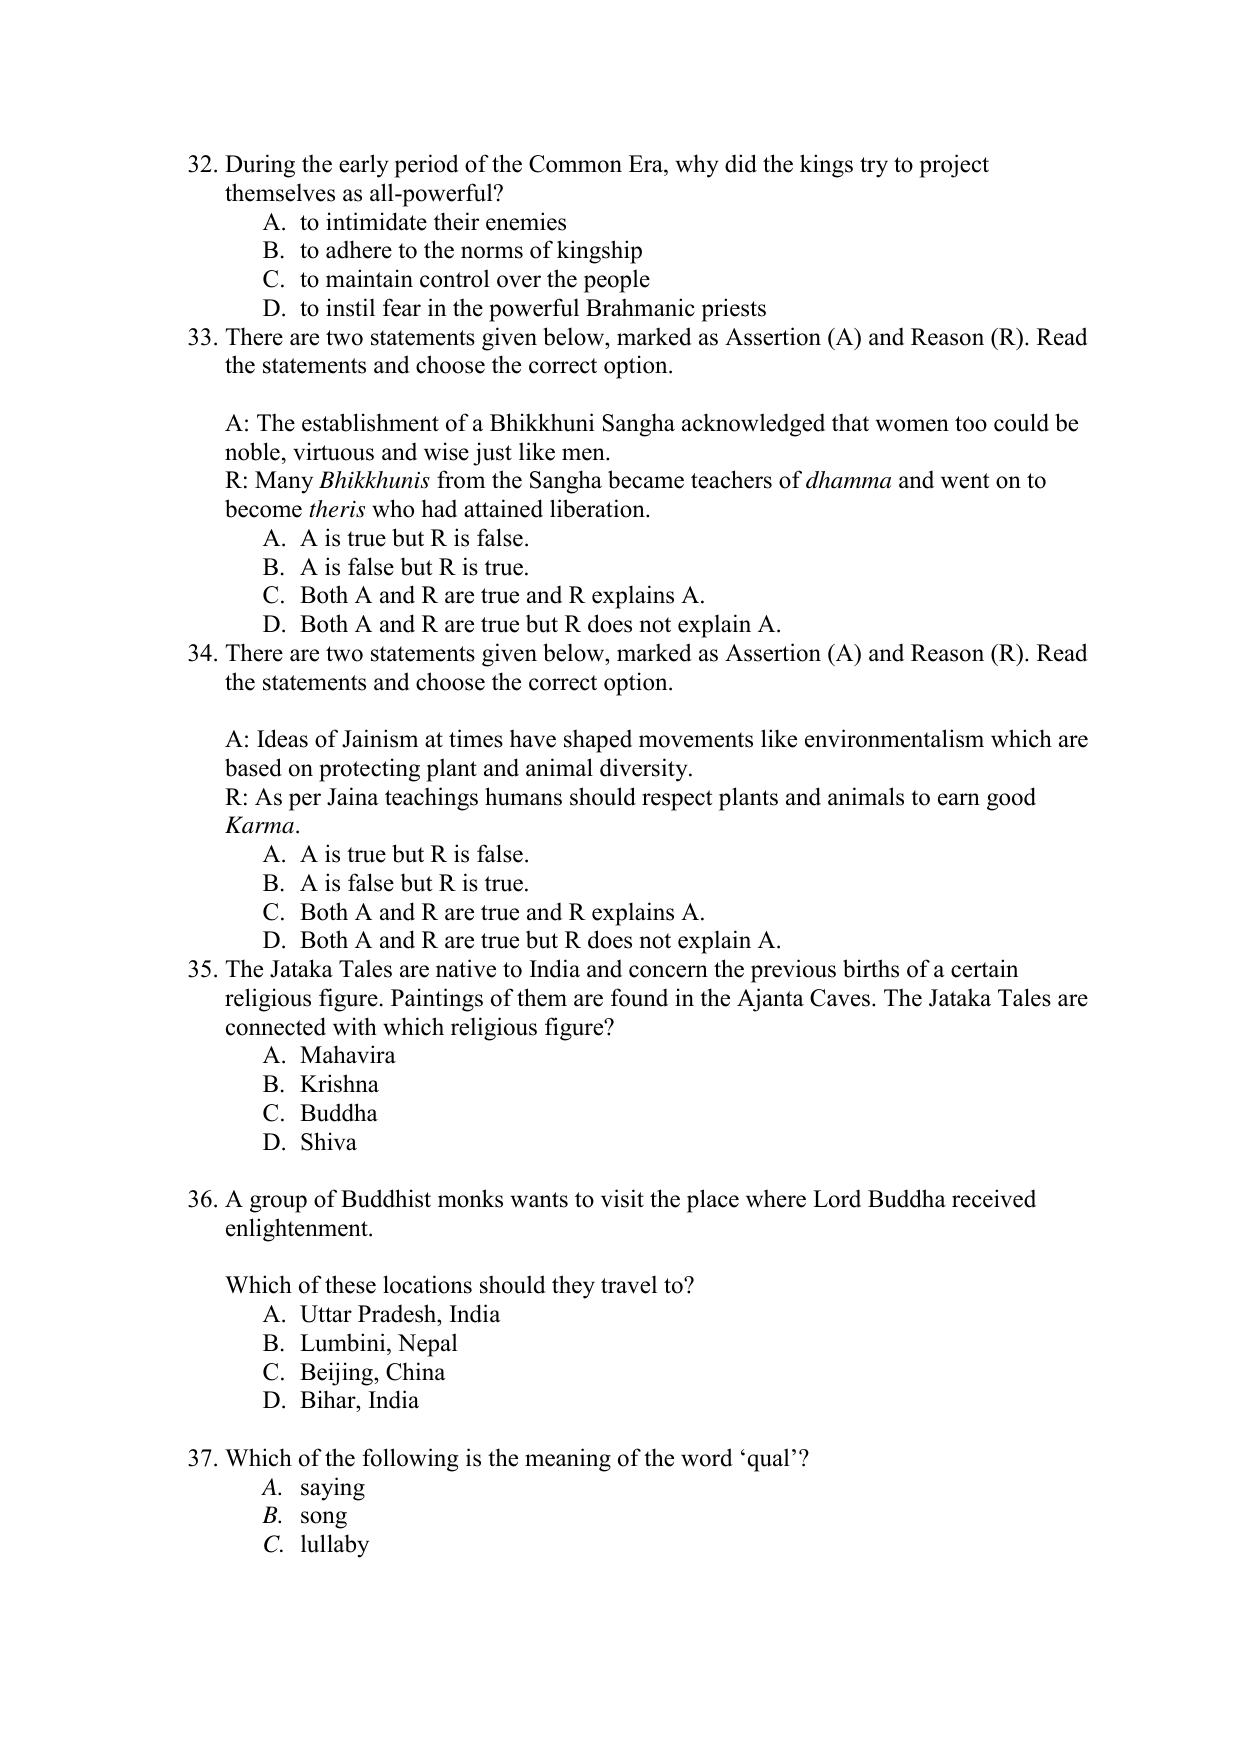 CBSE Class 12 History Term 1 Practice Questions 2021-22 - Page 7